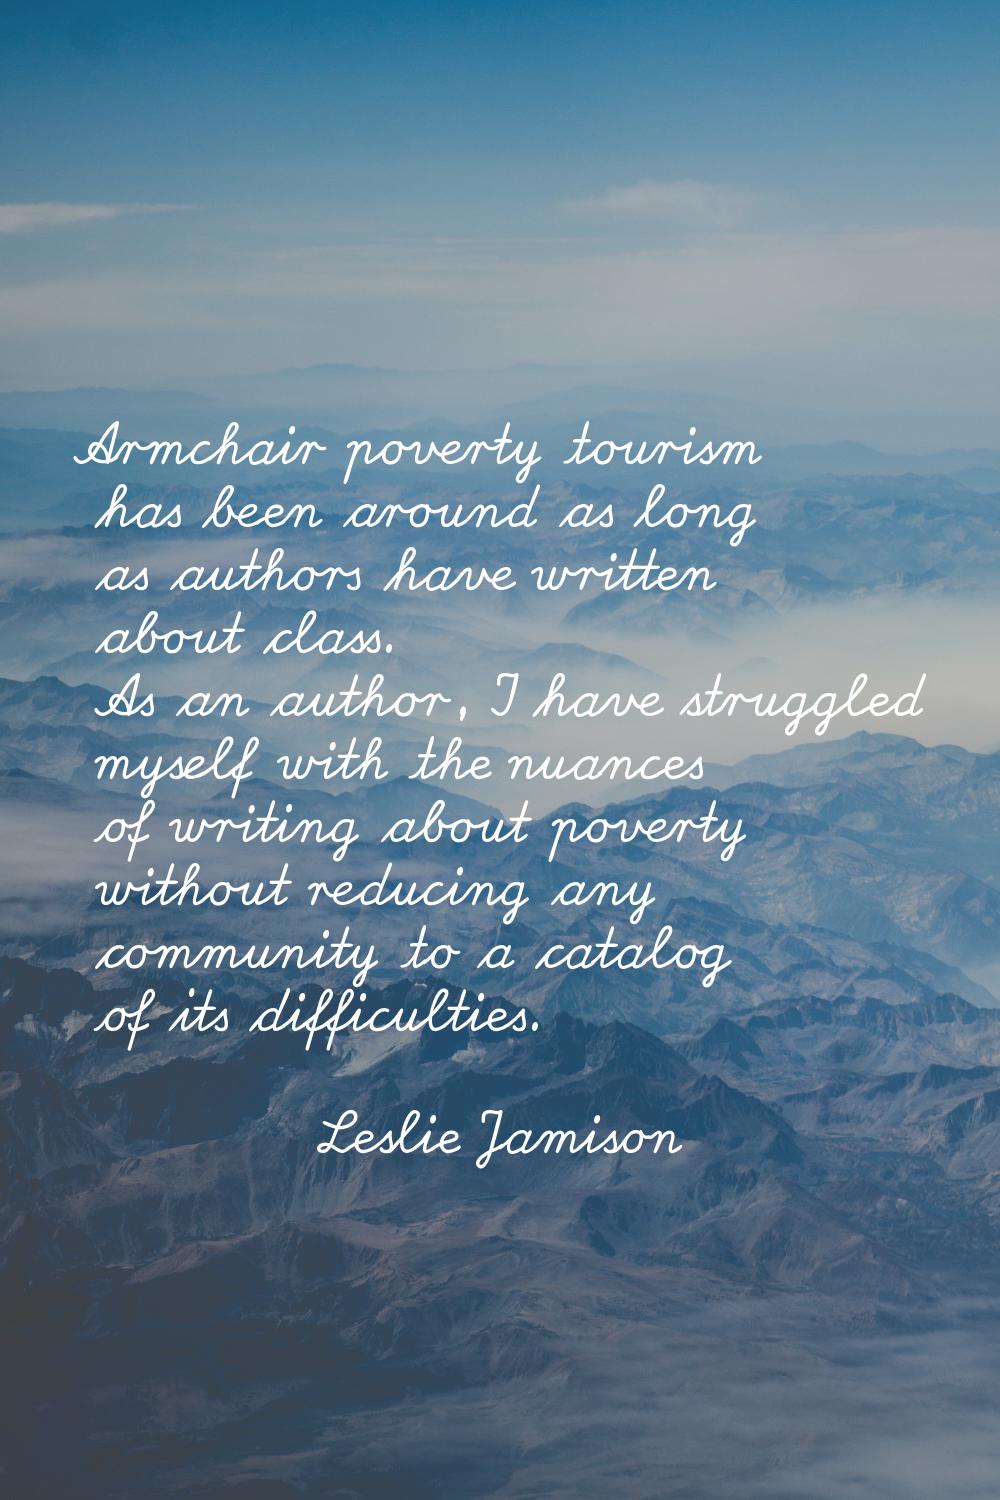 Armchair poverty tourism has been around as long as authors have written about class. As an author,